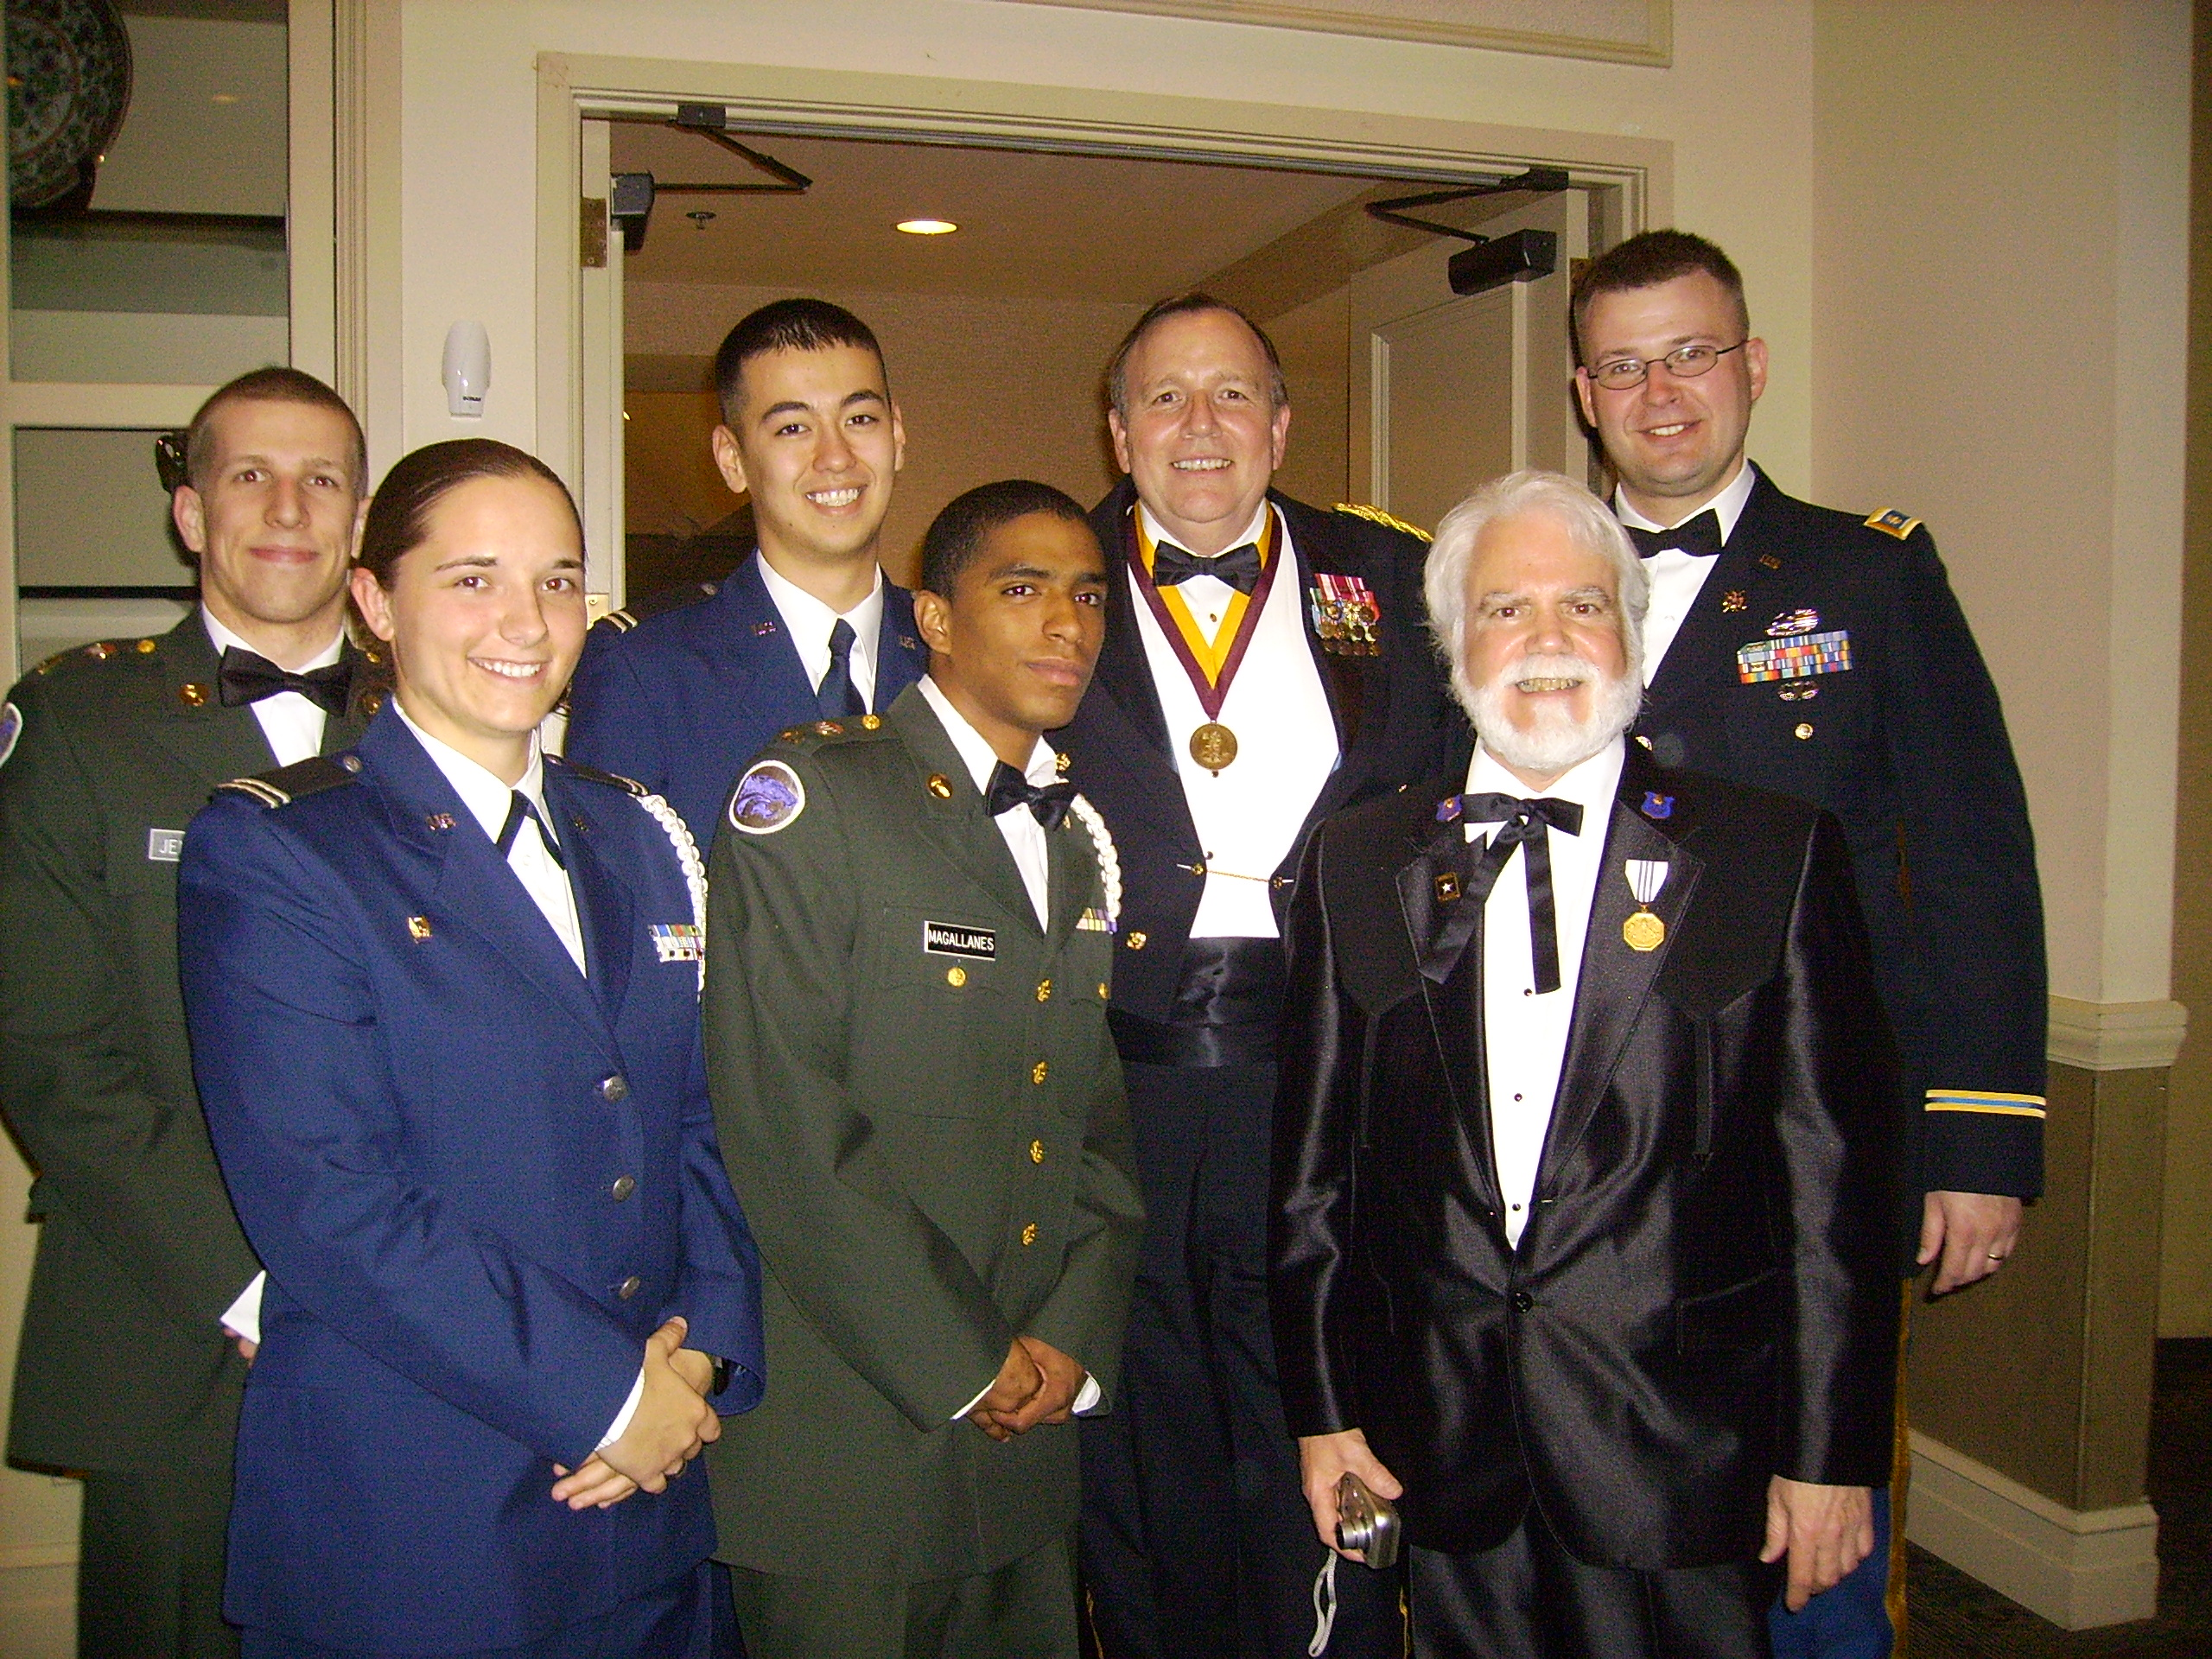 NATCON 2010: Members of the 1969 champtionship team with the first 4 new members of the re-born G7